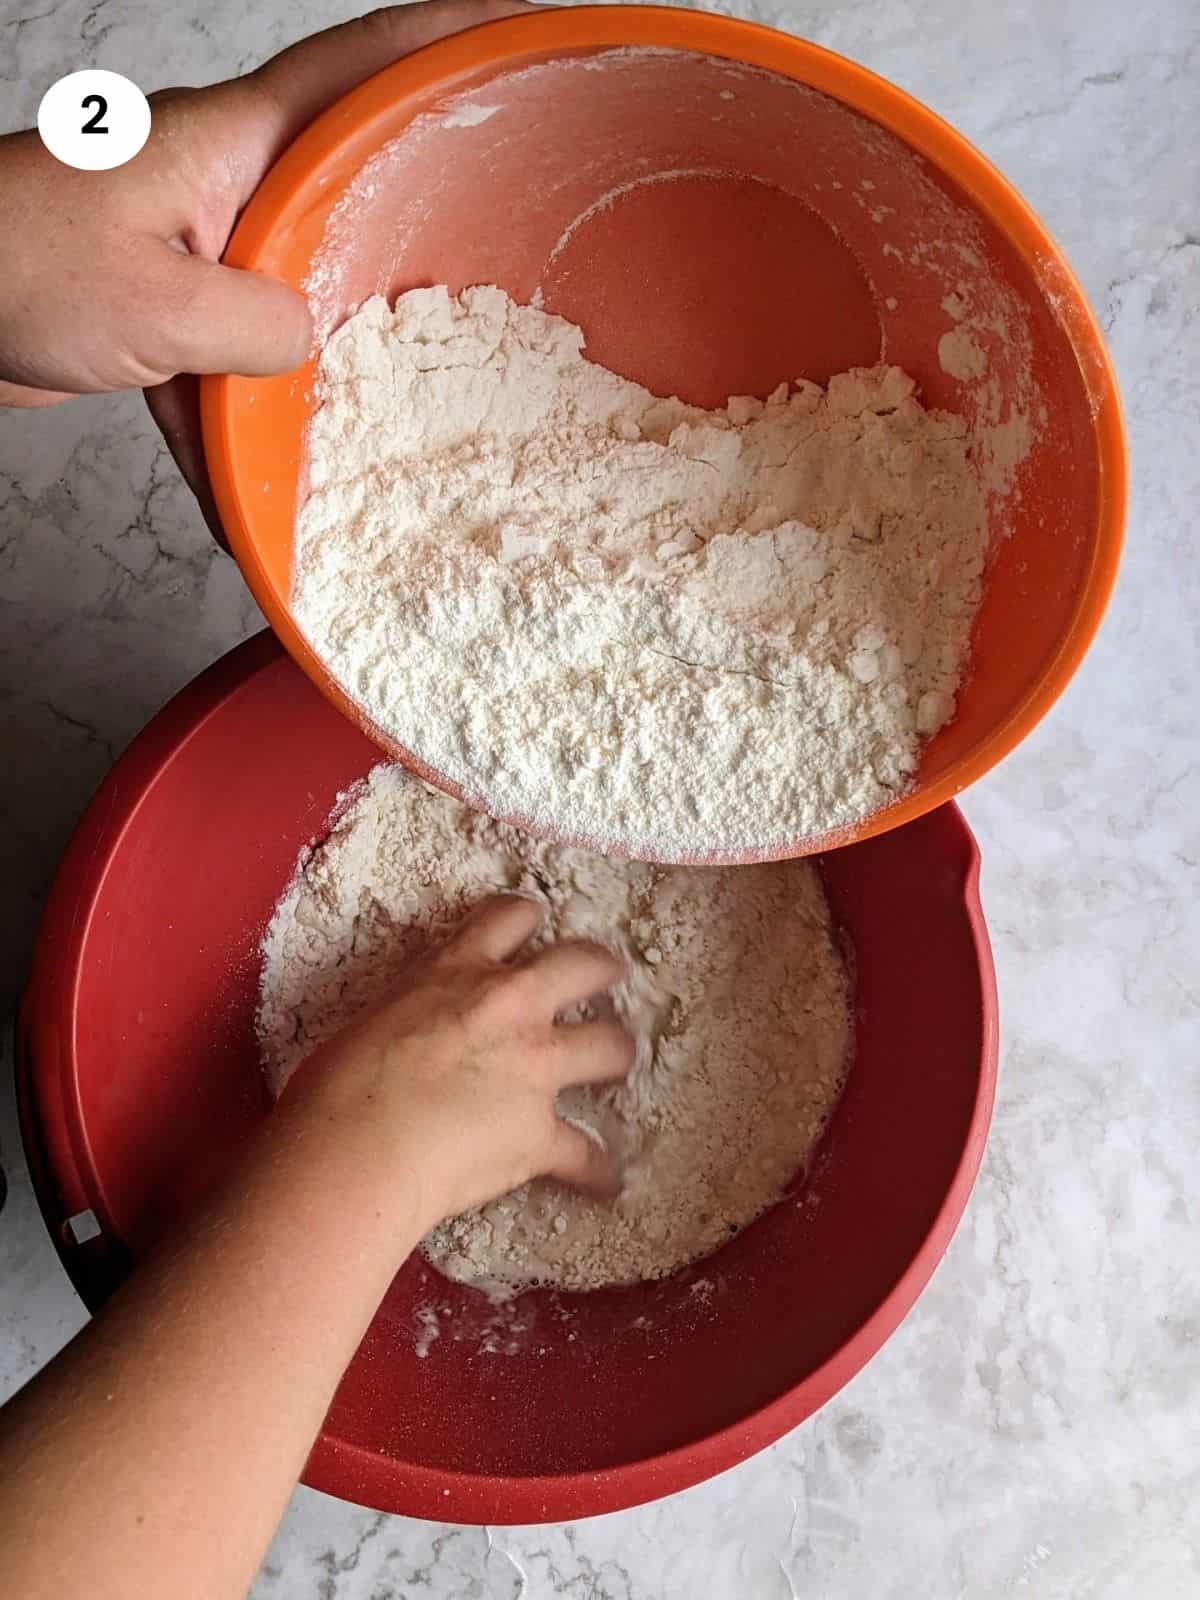 Mixing the flour with yeast in a bowl.